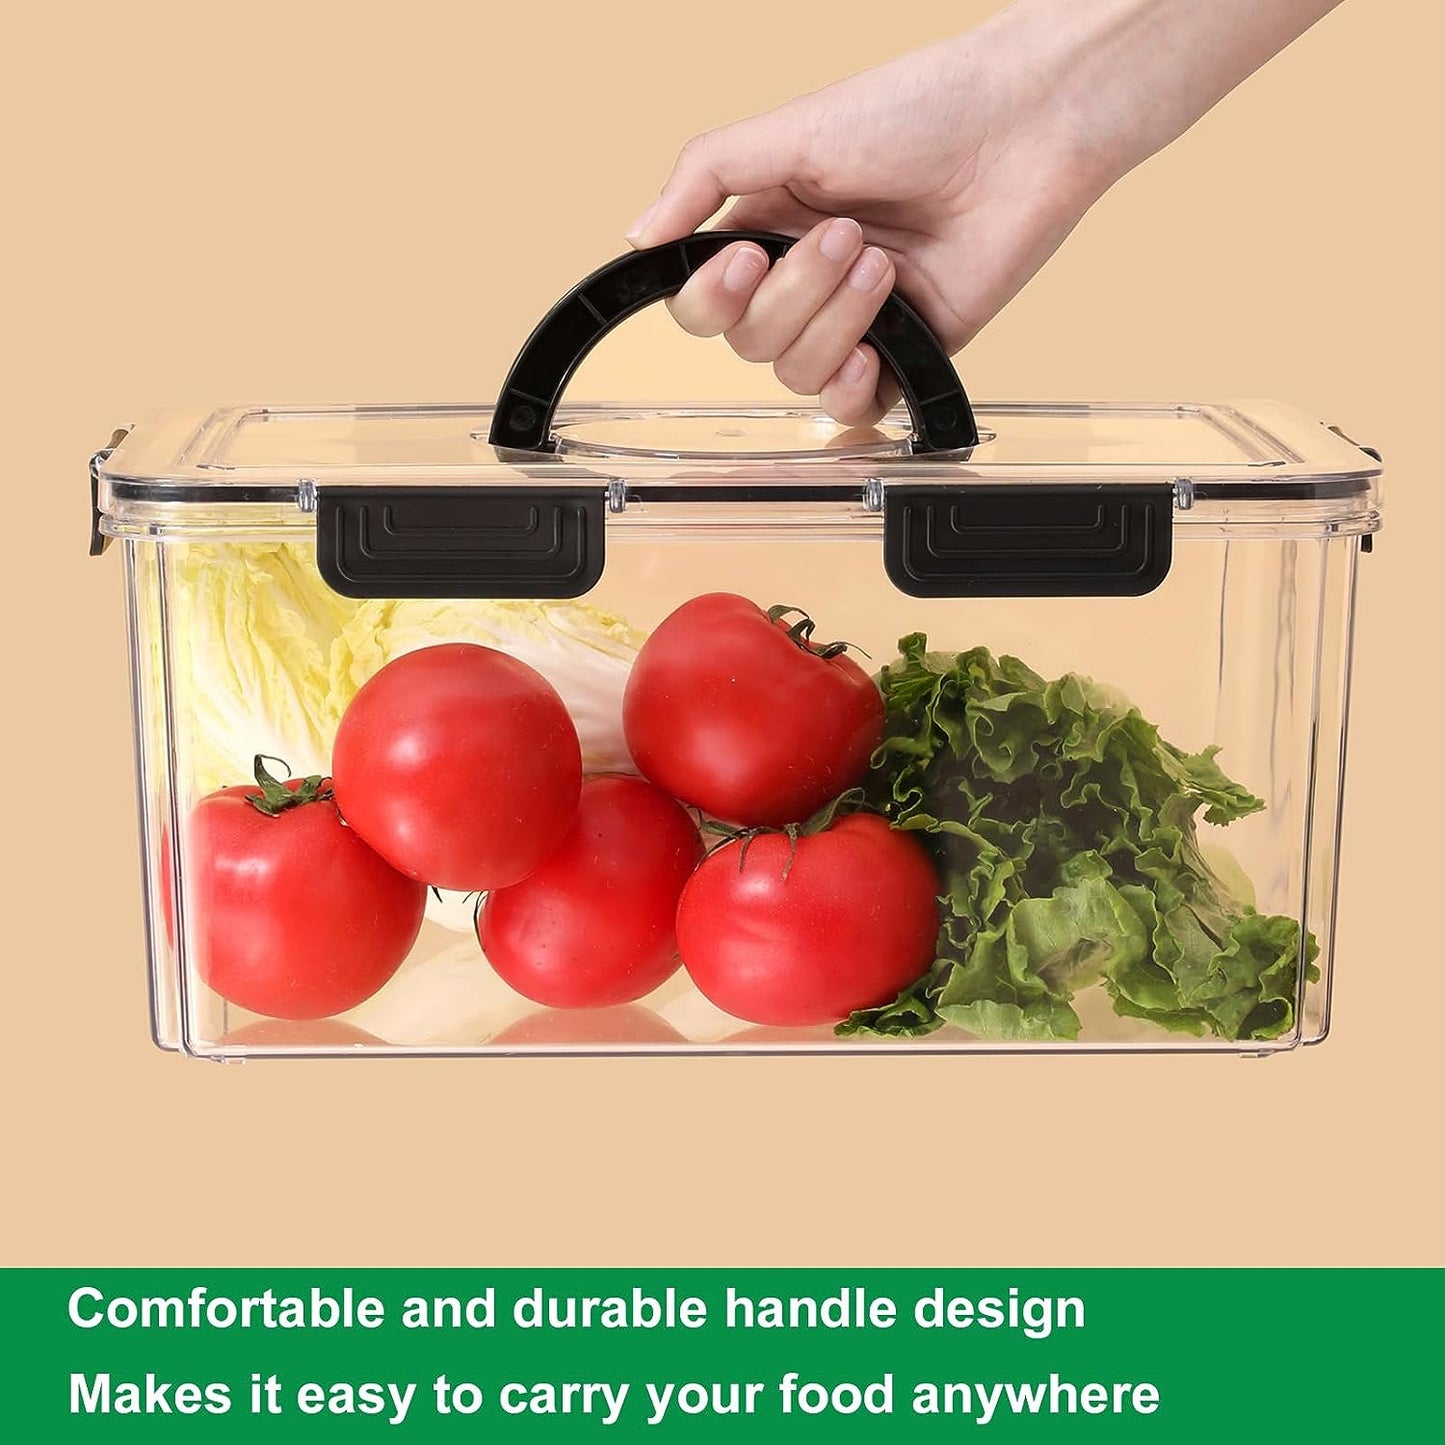 Airtight Fruit Storage Containers for Fridge with Lids & Handle, Bpa-Free Food Storage Container with 4 Removable Colanders, Berry Vegetable Fresh Produce Saver, Refrigerator Organizer Bins